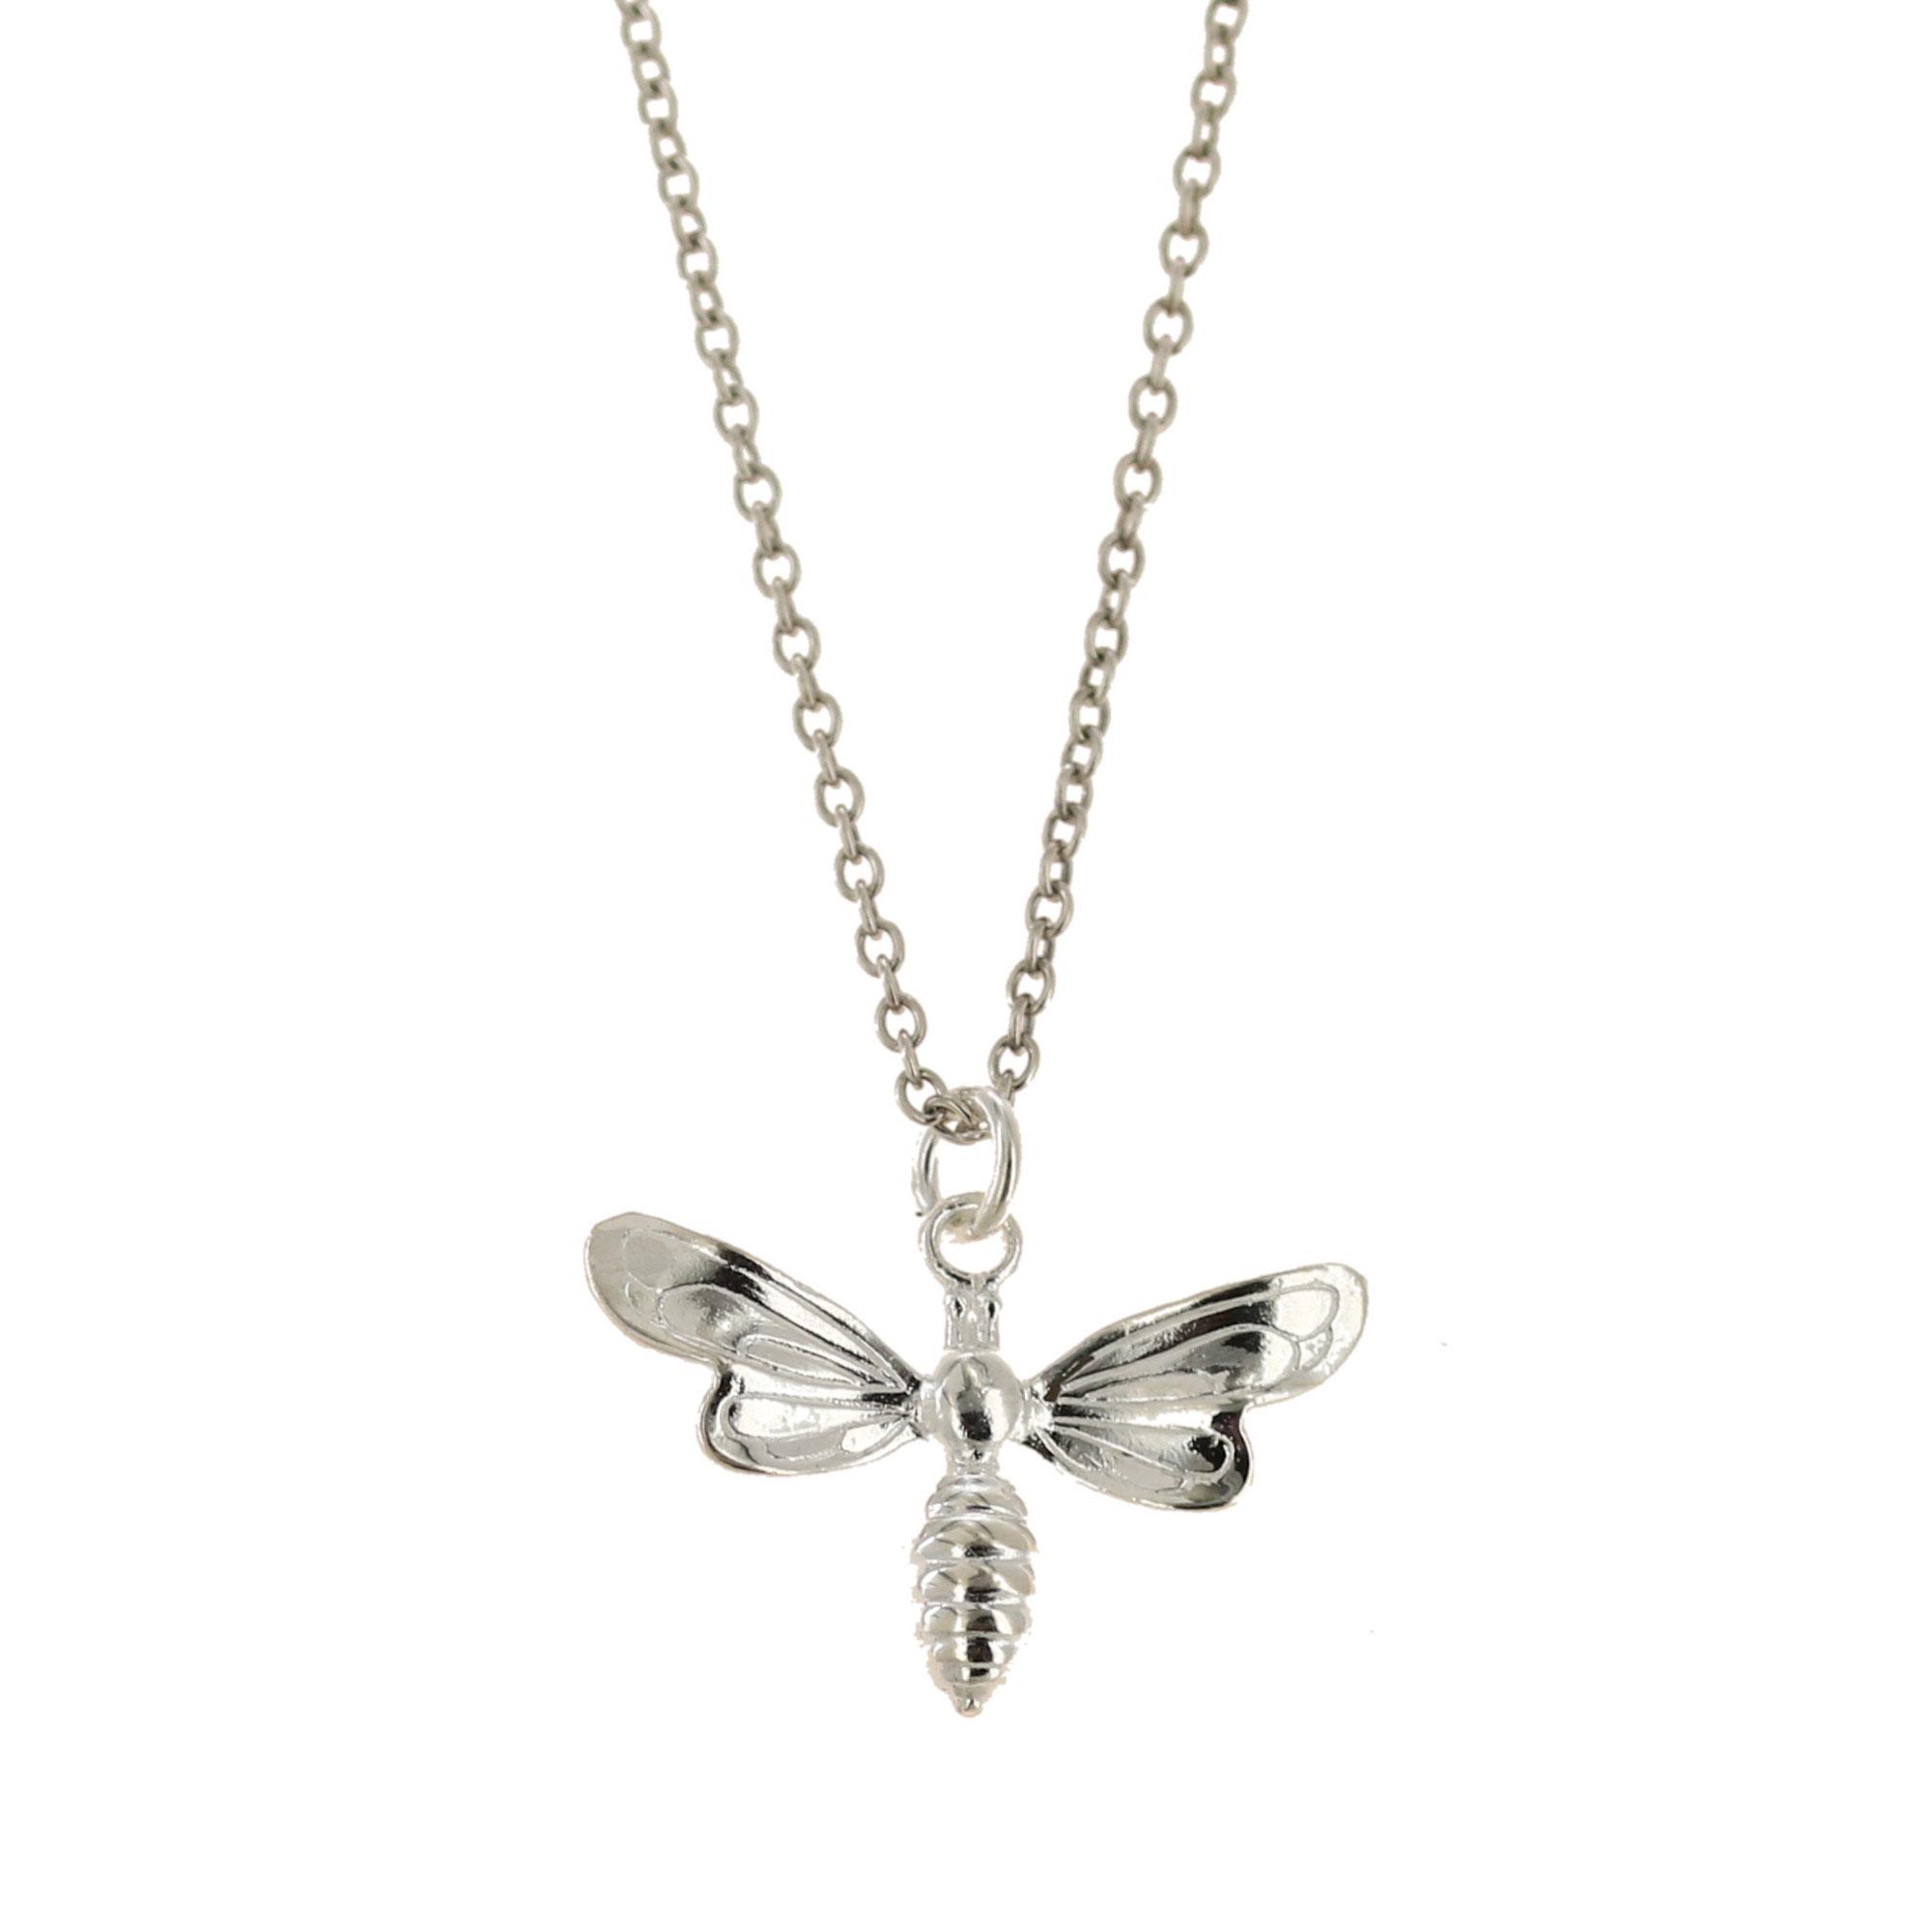 3D Sterling Silver Honey Bee Pendant or make it a necklace with an optional Chain.